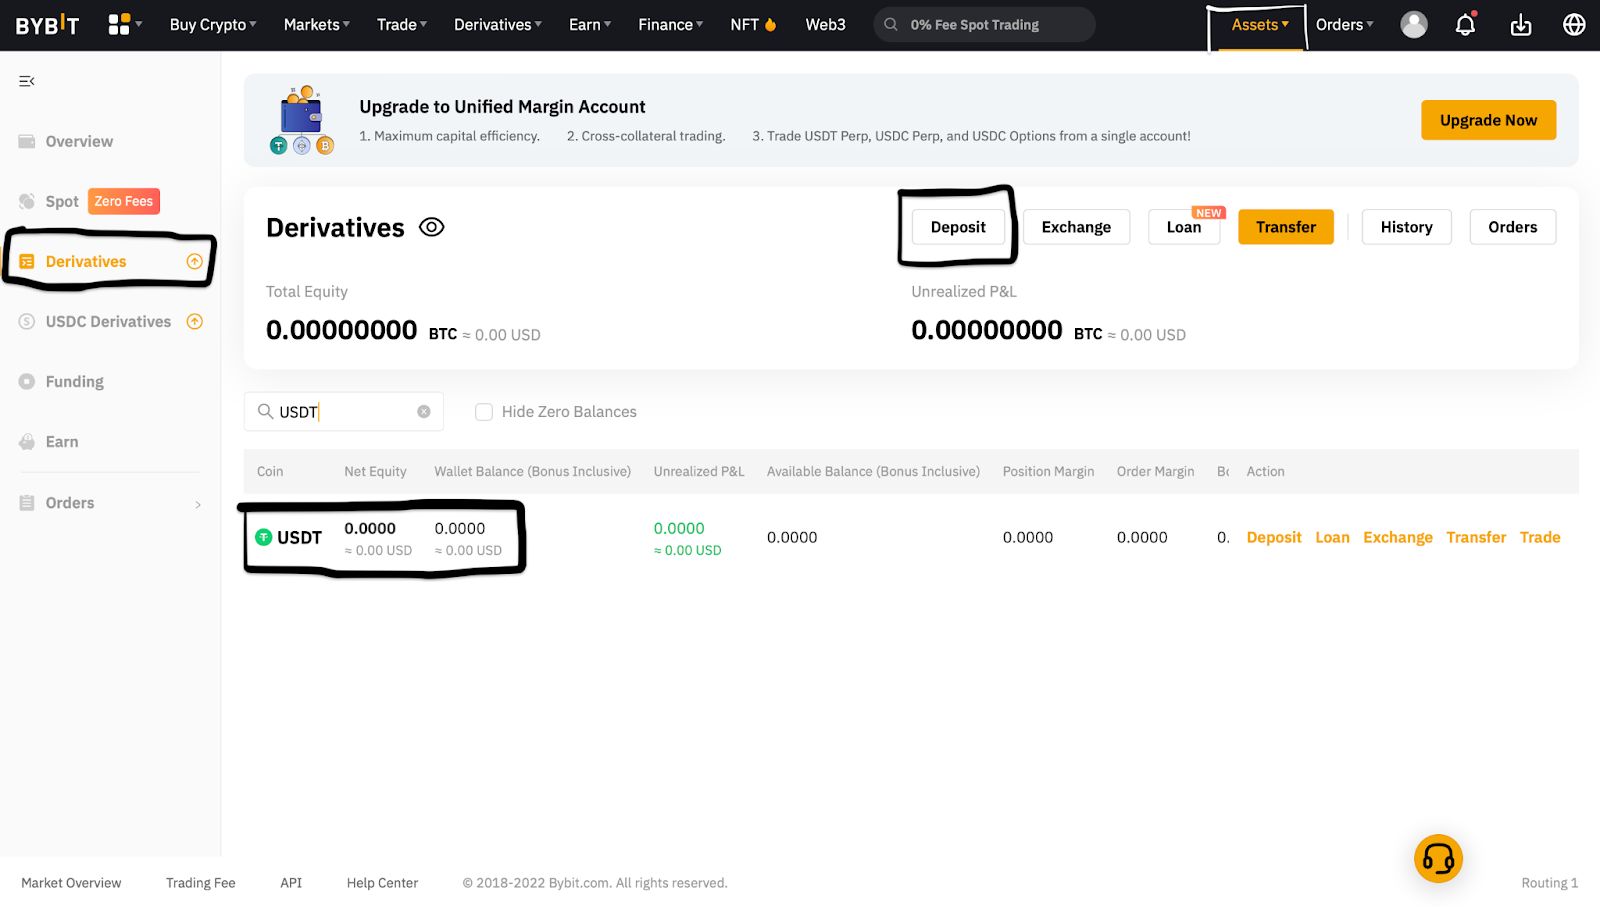 How to Short Sell on Bybit  - - 2023